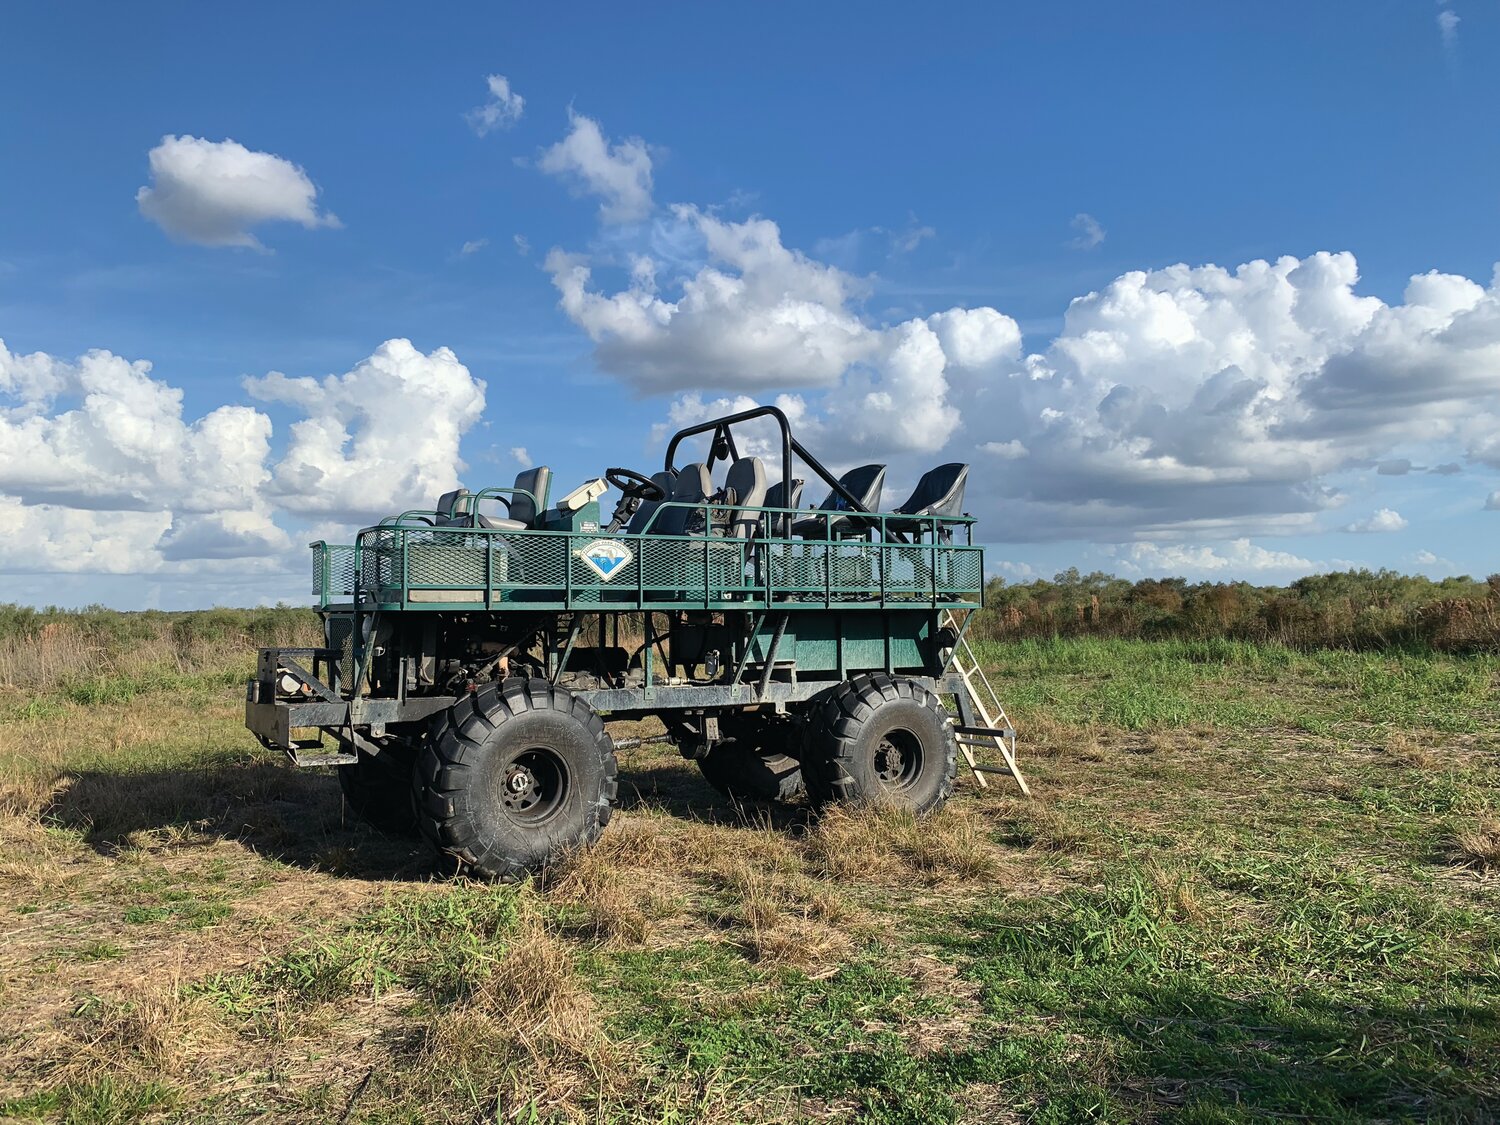 Kissimmee Prairie Preserve State Park offers Guided Prairie Buggy Tours. On the buggy you will have an elevated seat on a guided tour of the largest remaining stretch of wild prairie in Florida. The buggy tour runs on Saturday and Sunday and state holidays at 9 a.m., November through March.